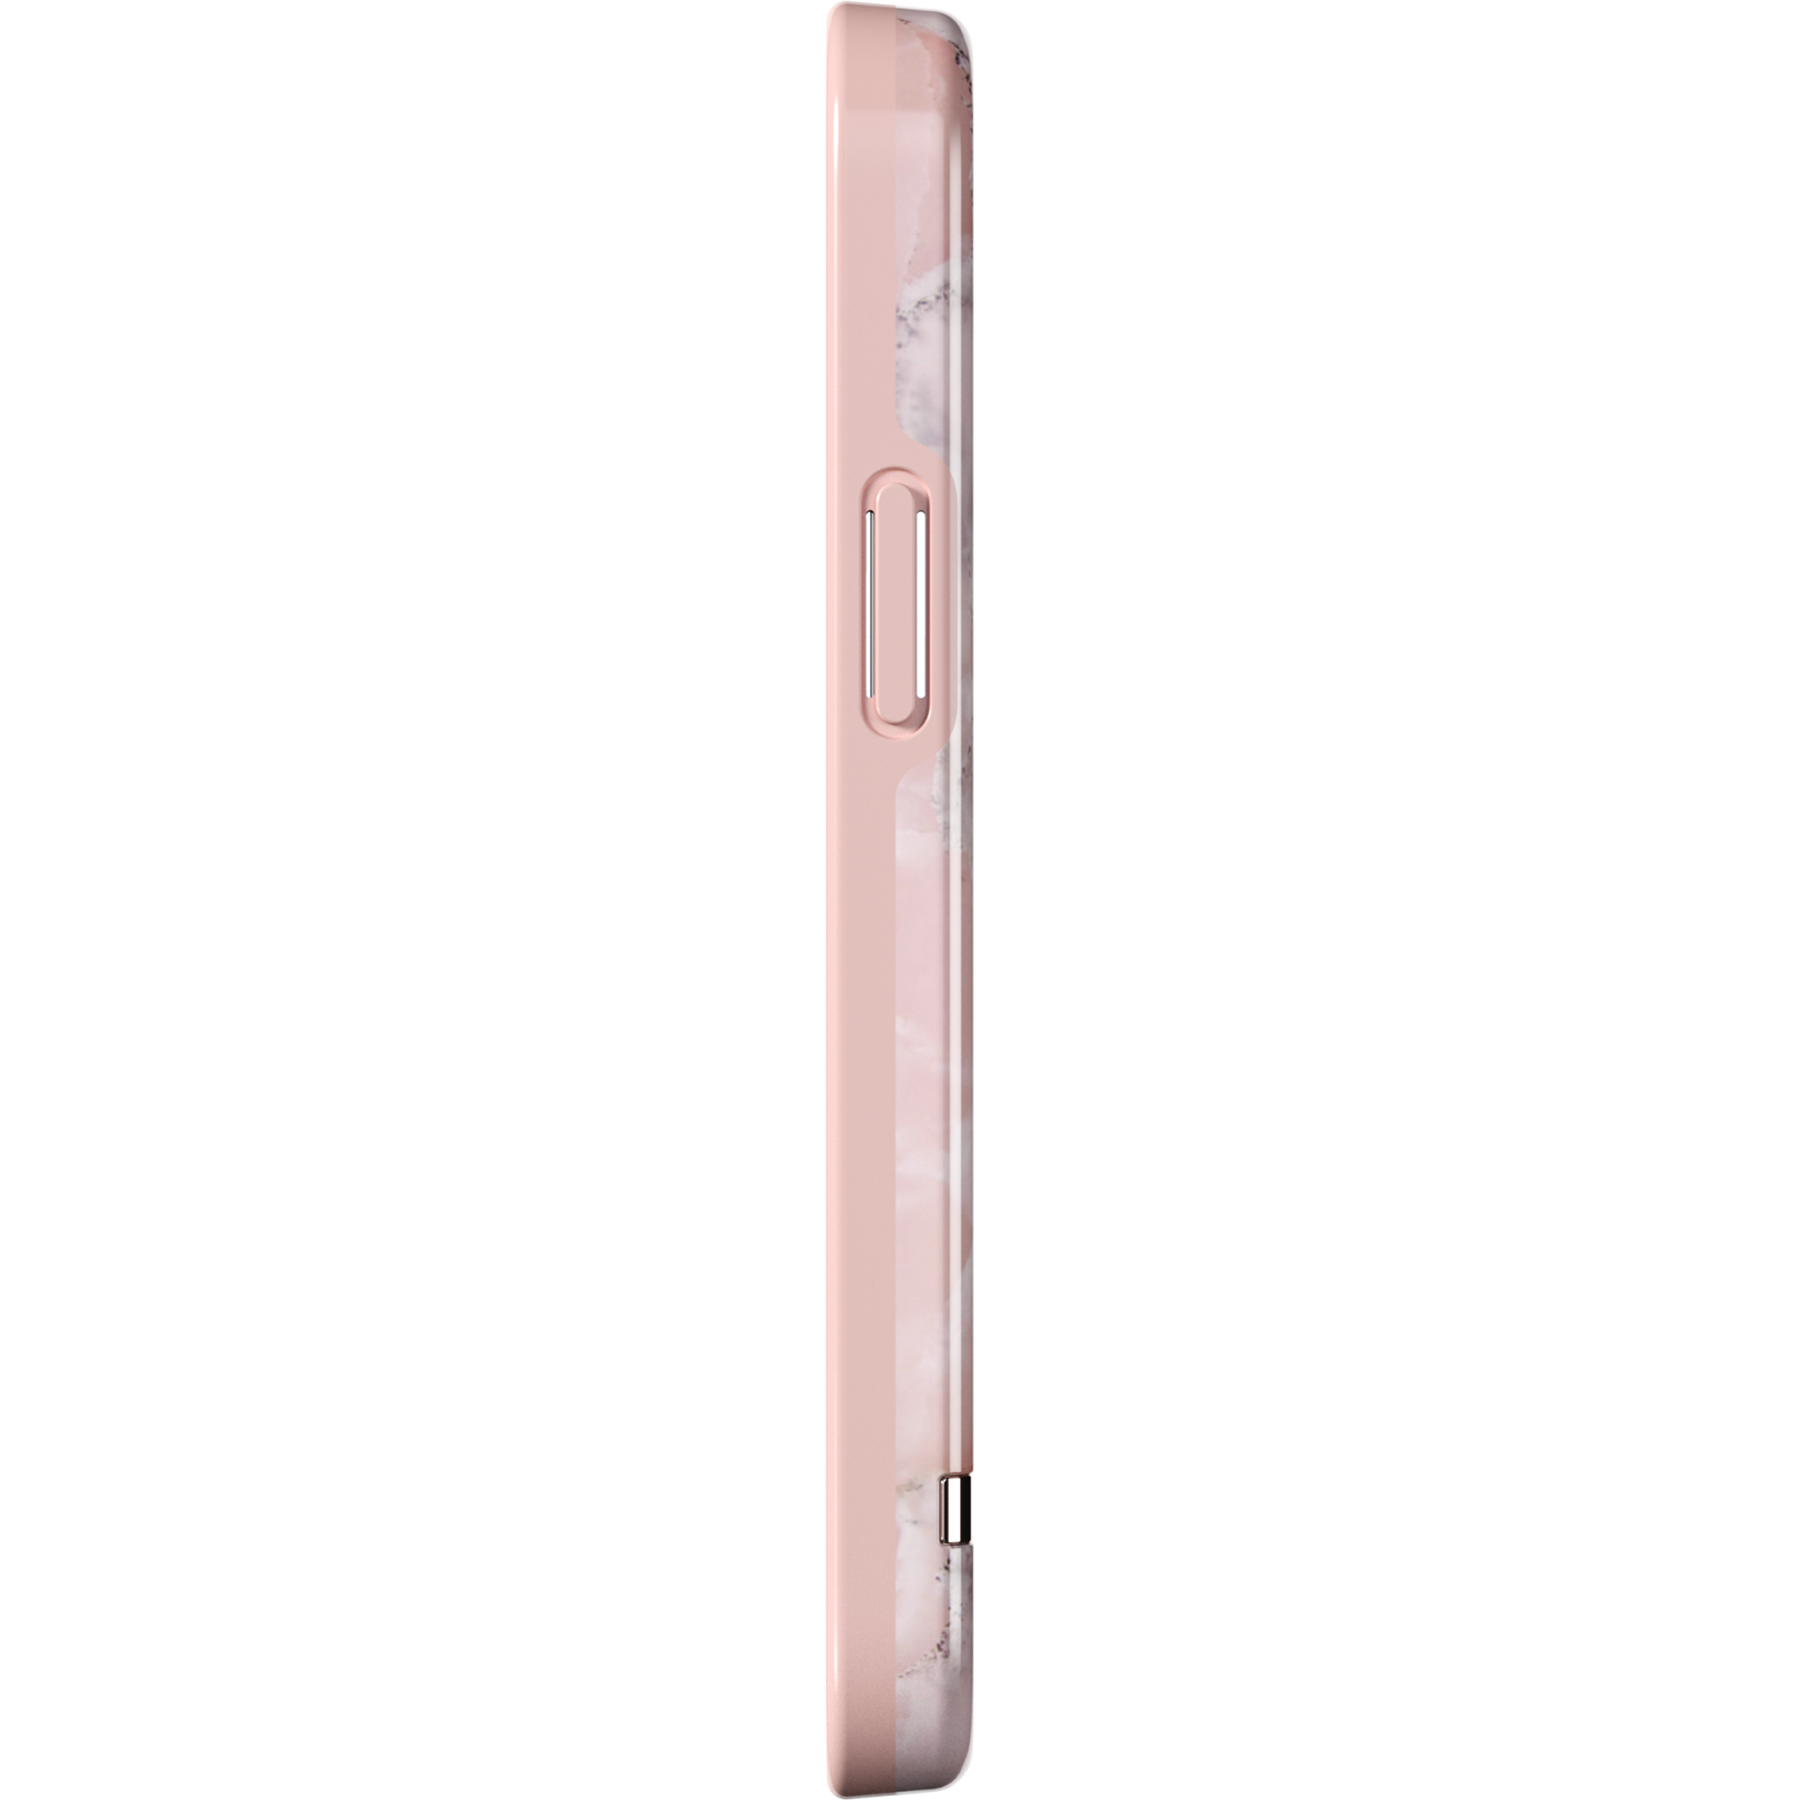 Hülle iPhone 12 Mini Pink Marble